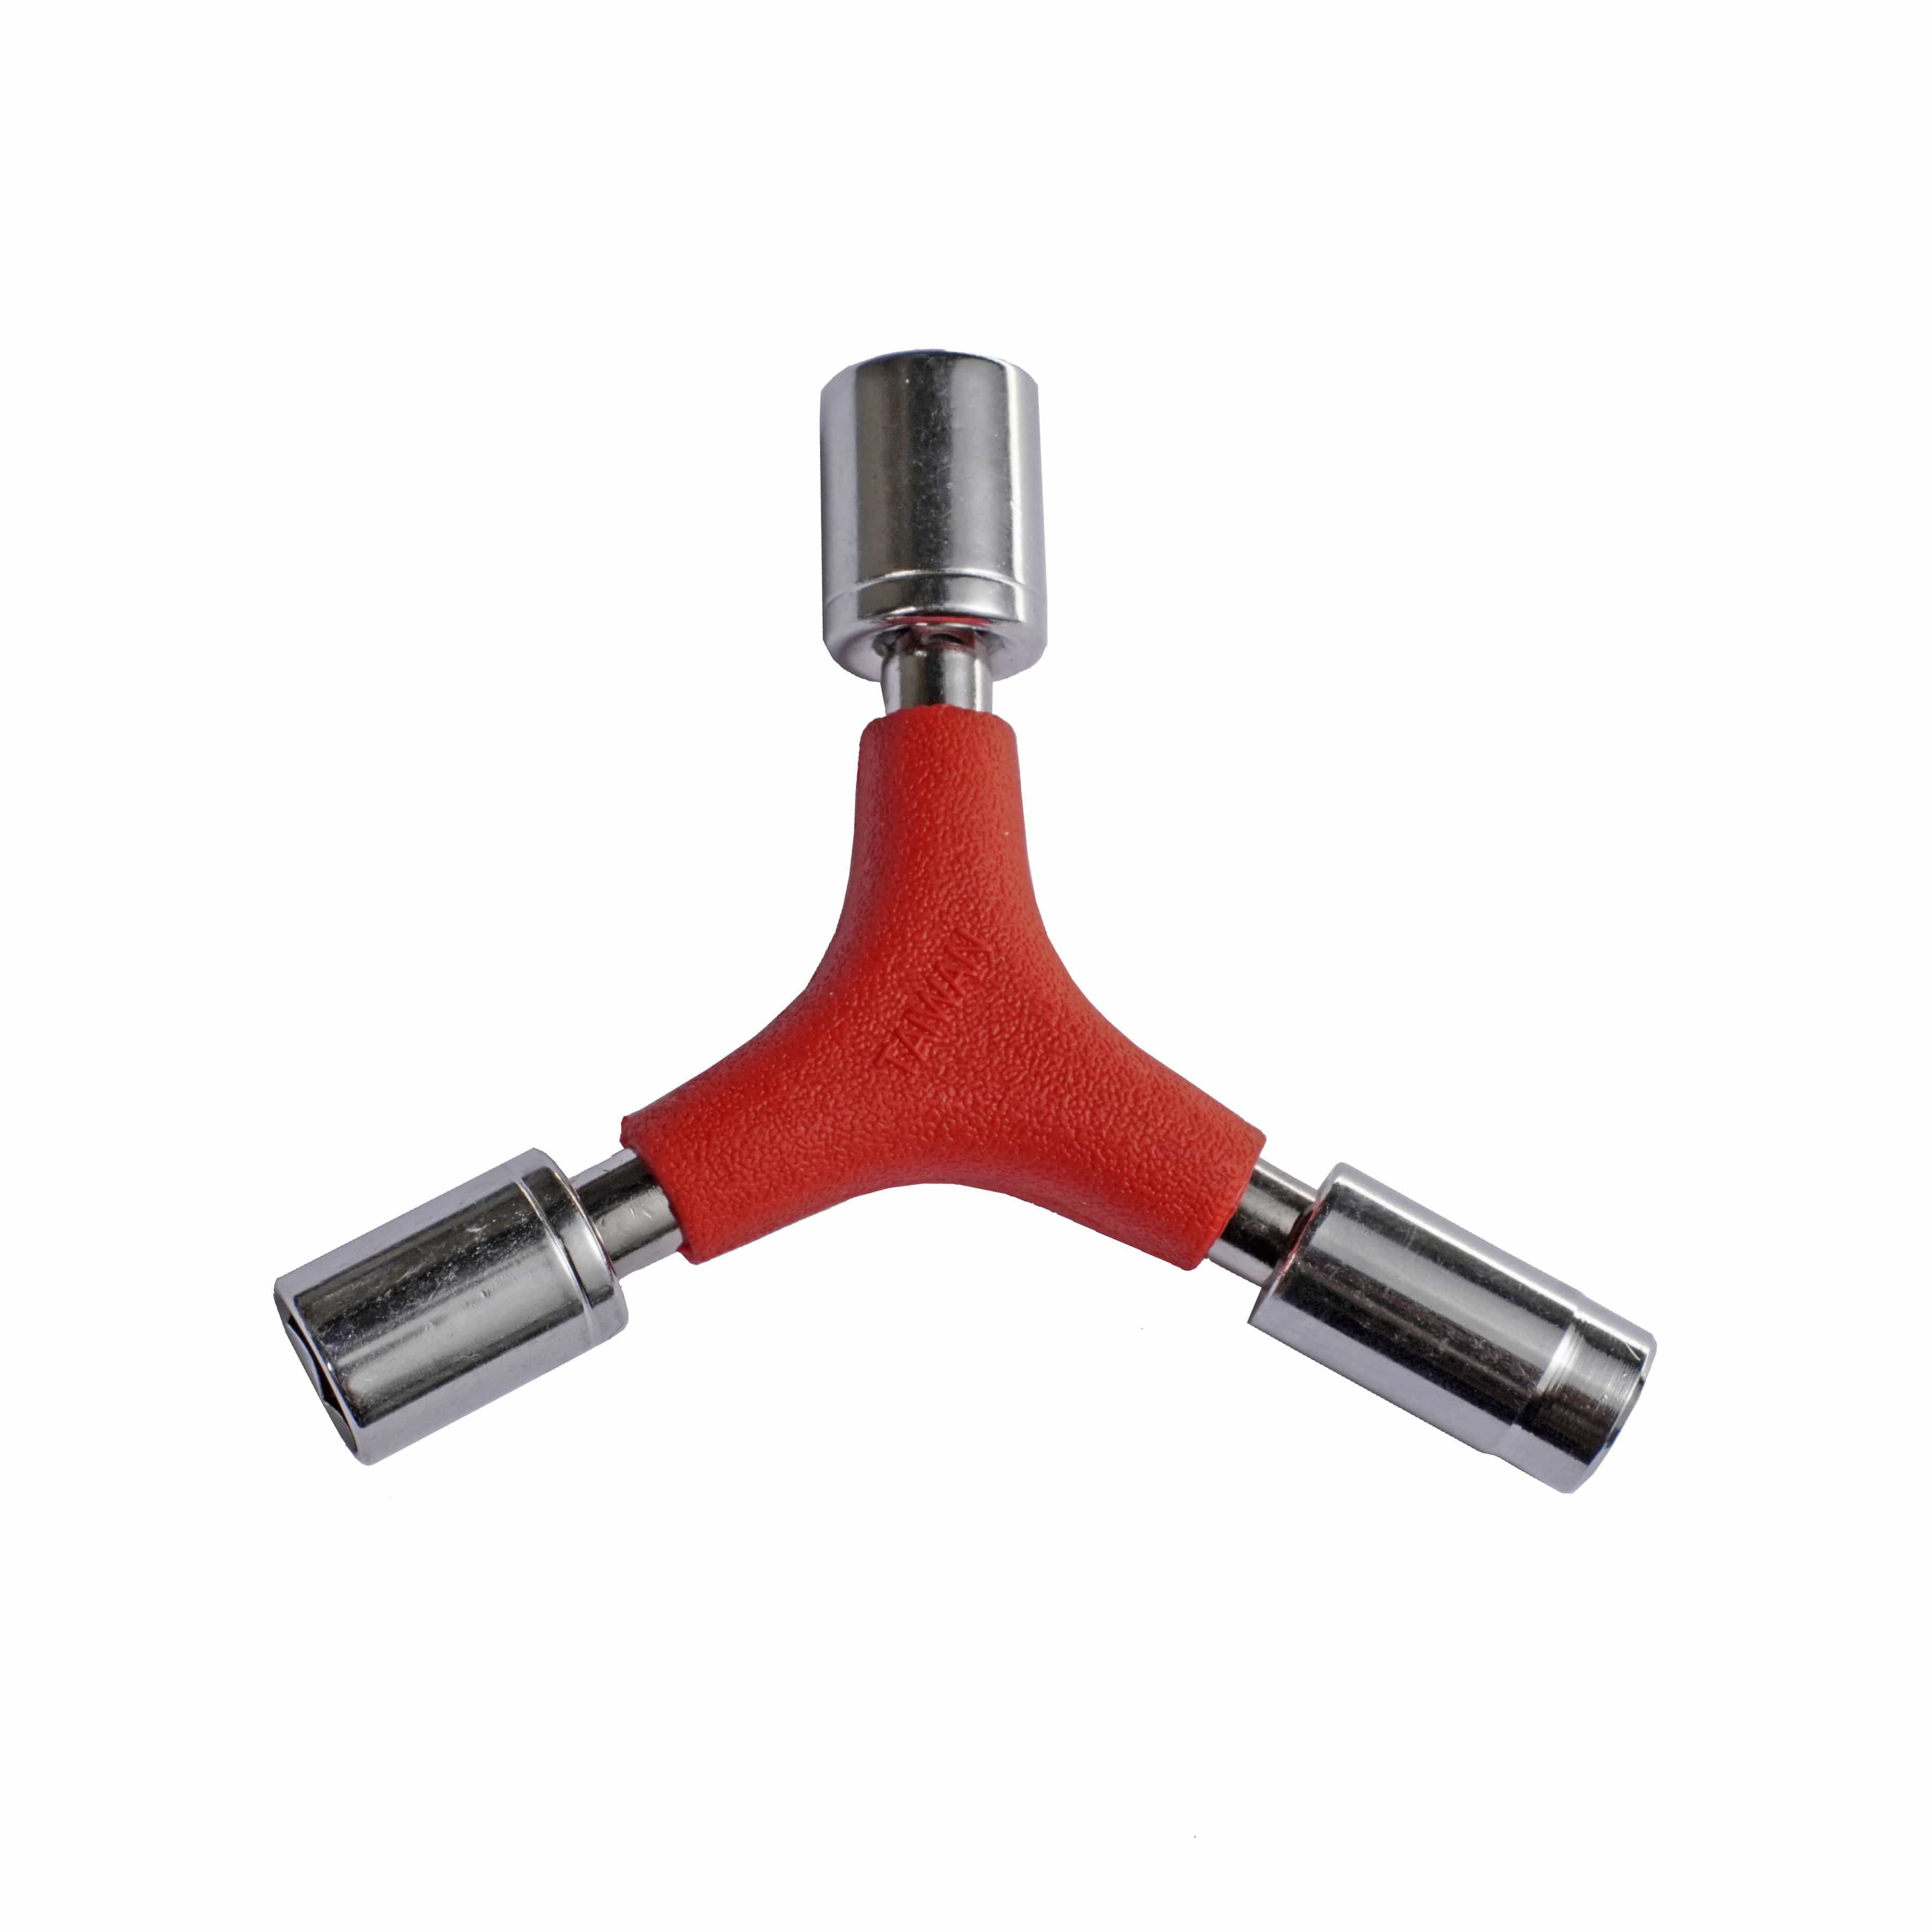 3 Way Mini Wrench 10 mm, 11 mm,  Socket With Magnetic Bit Holder